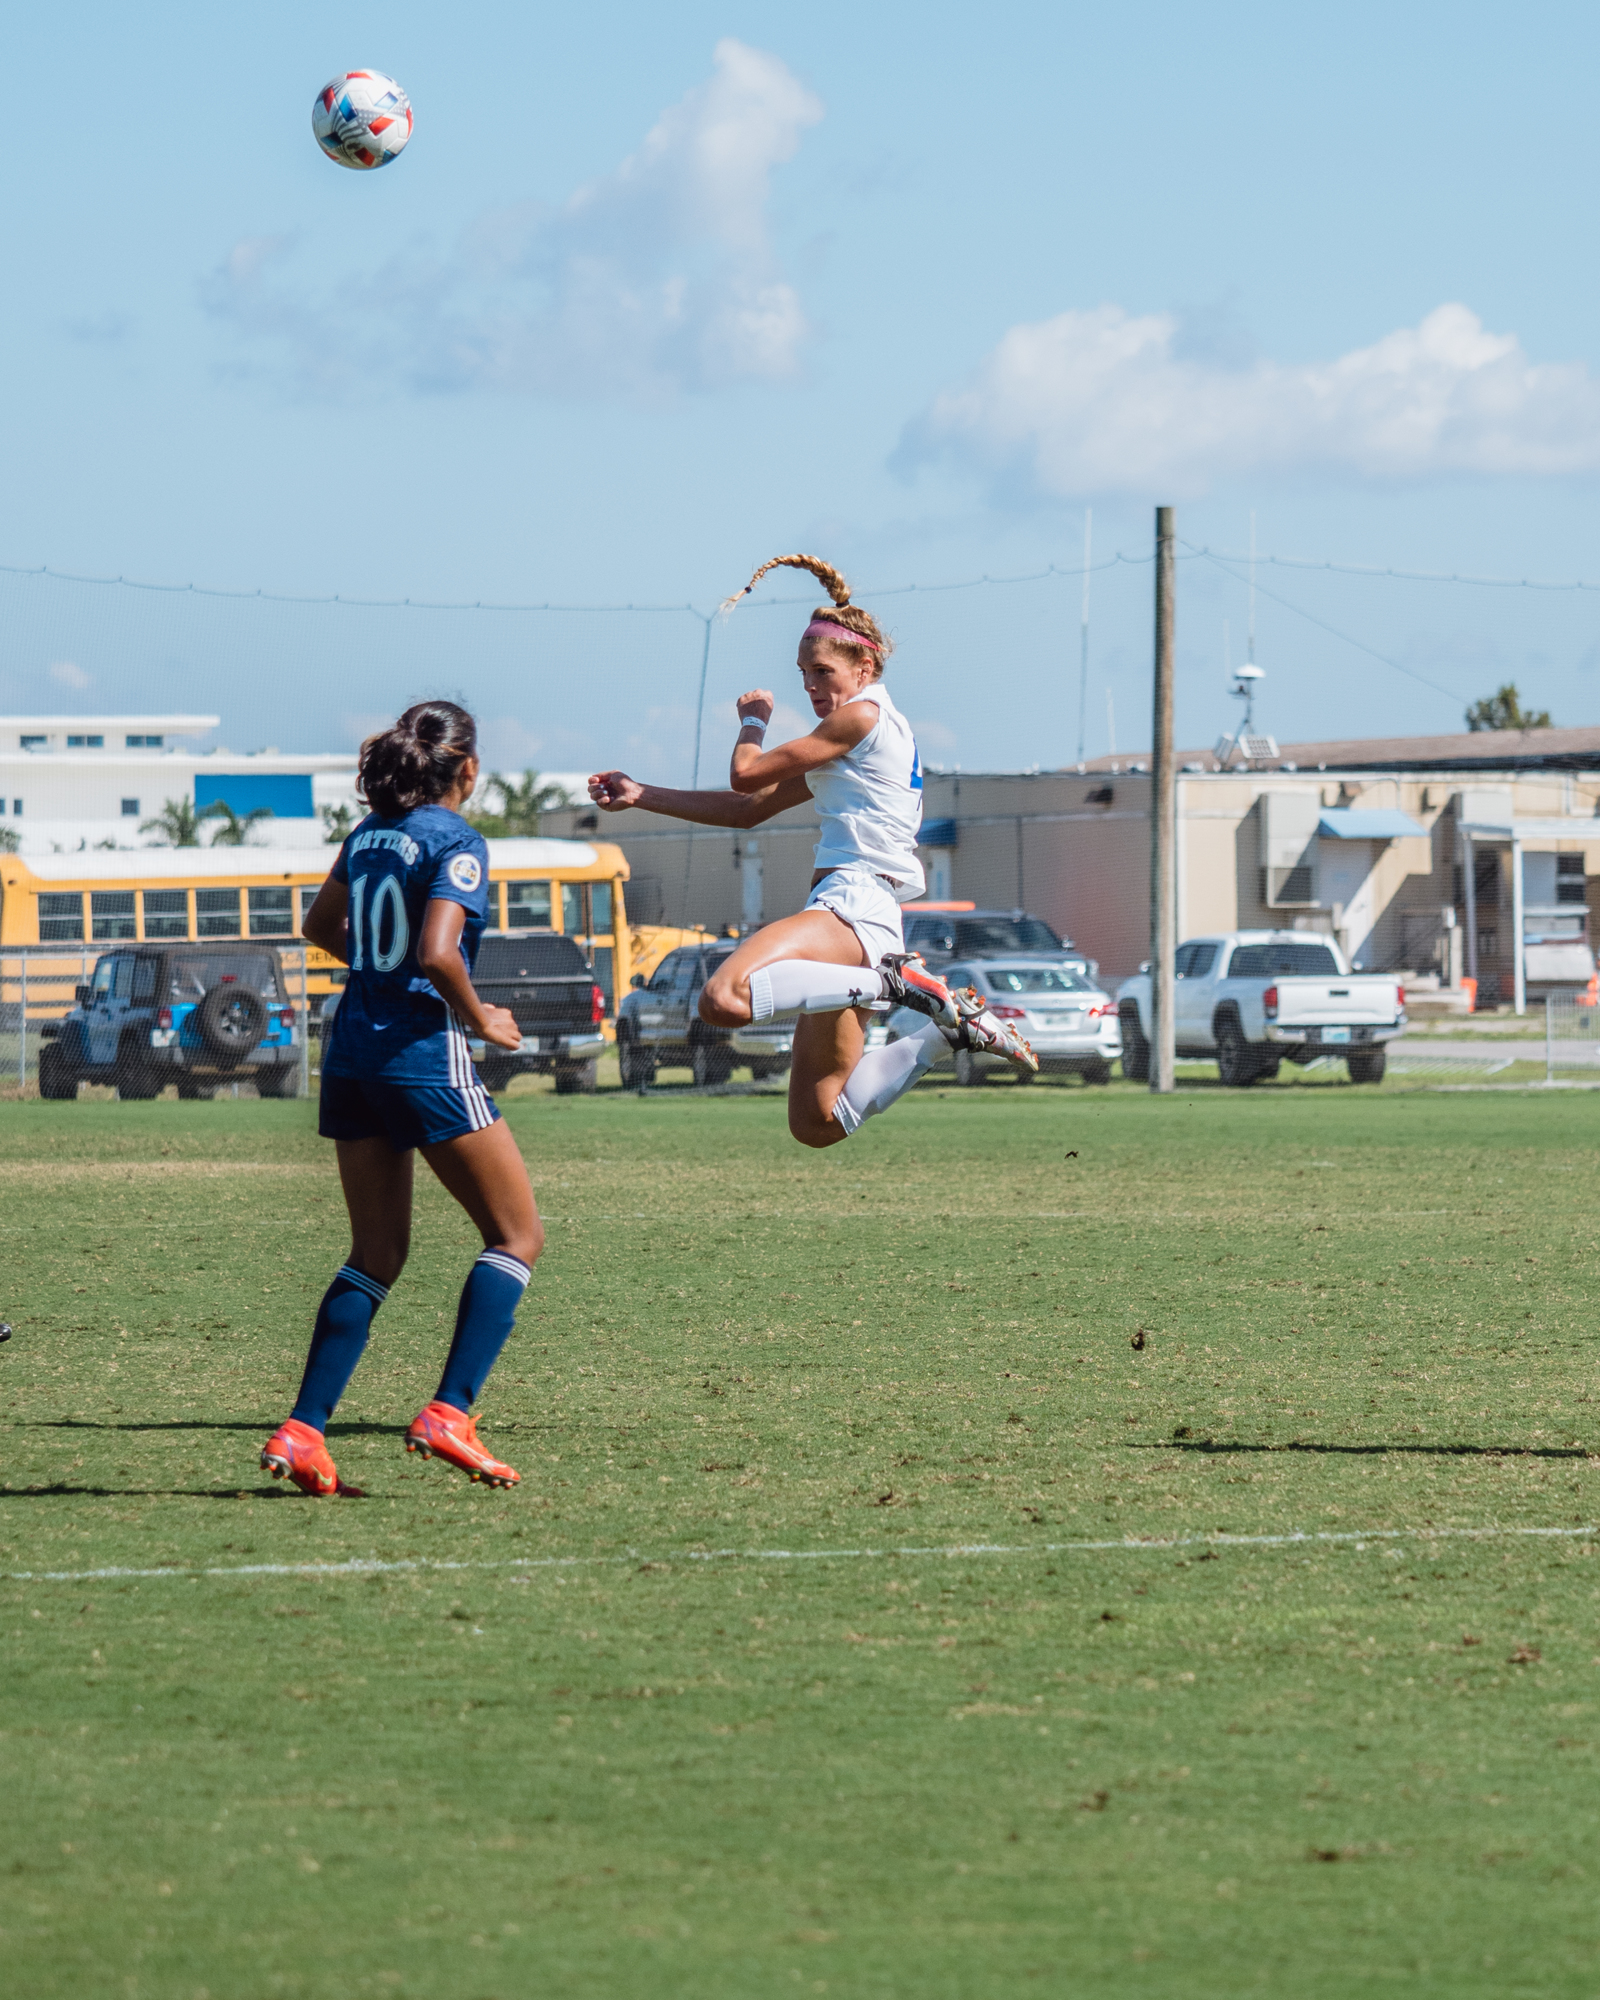 Sarasota native Amelia Malkin, who plays girls soccer for IMG Academy, committed to Florida in December. Courtesy photo.